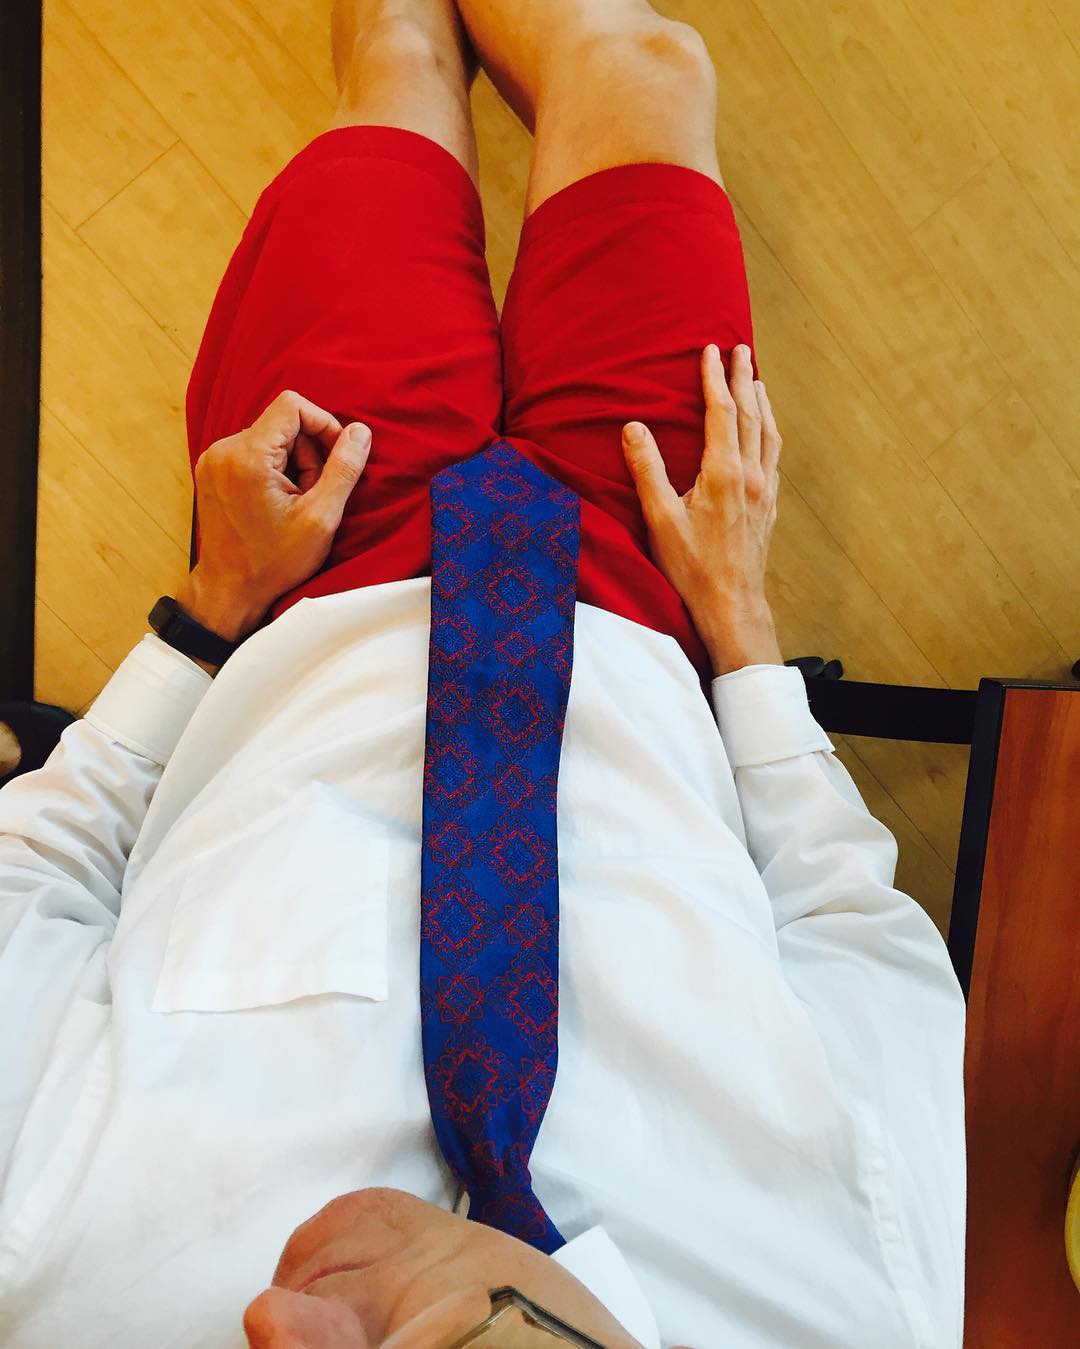 Rocking red shorts and awesome #tiedayfriday vintage Jerry